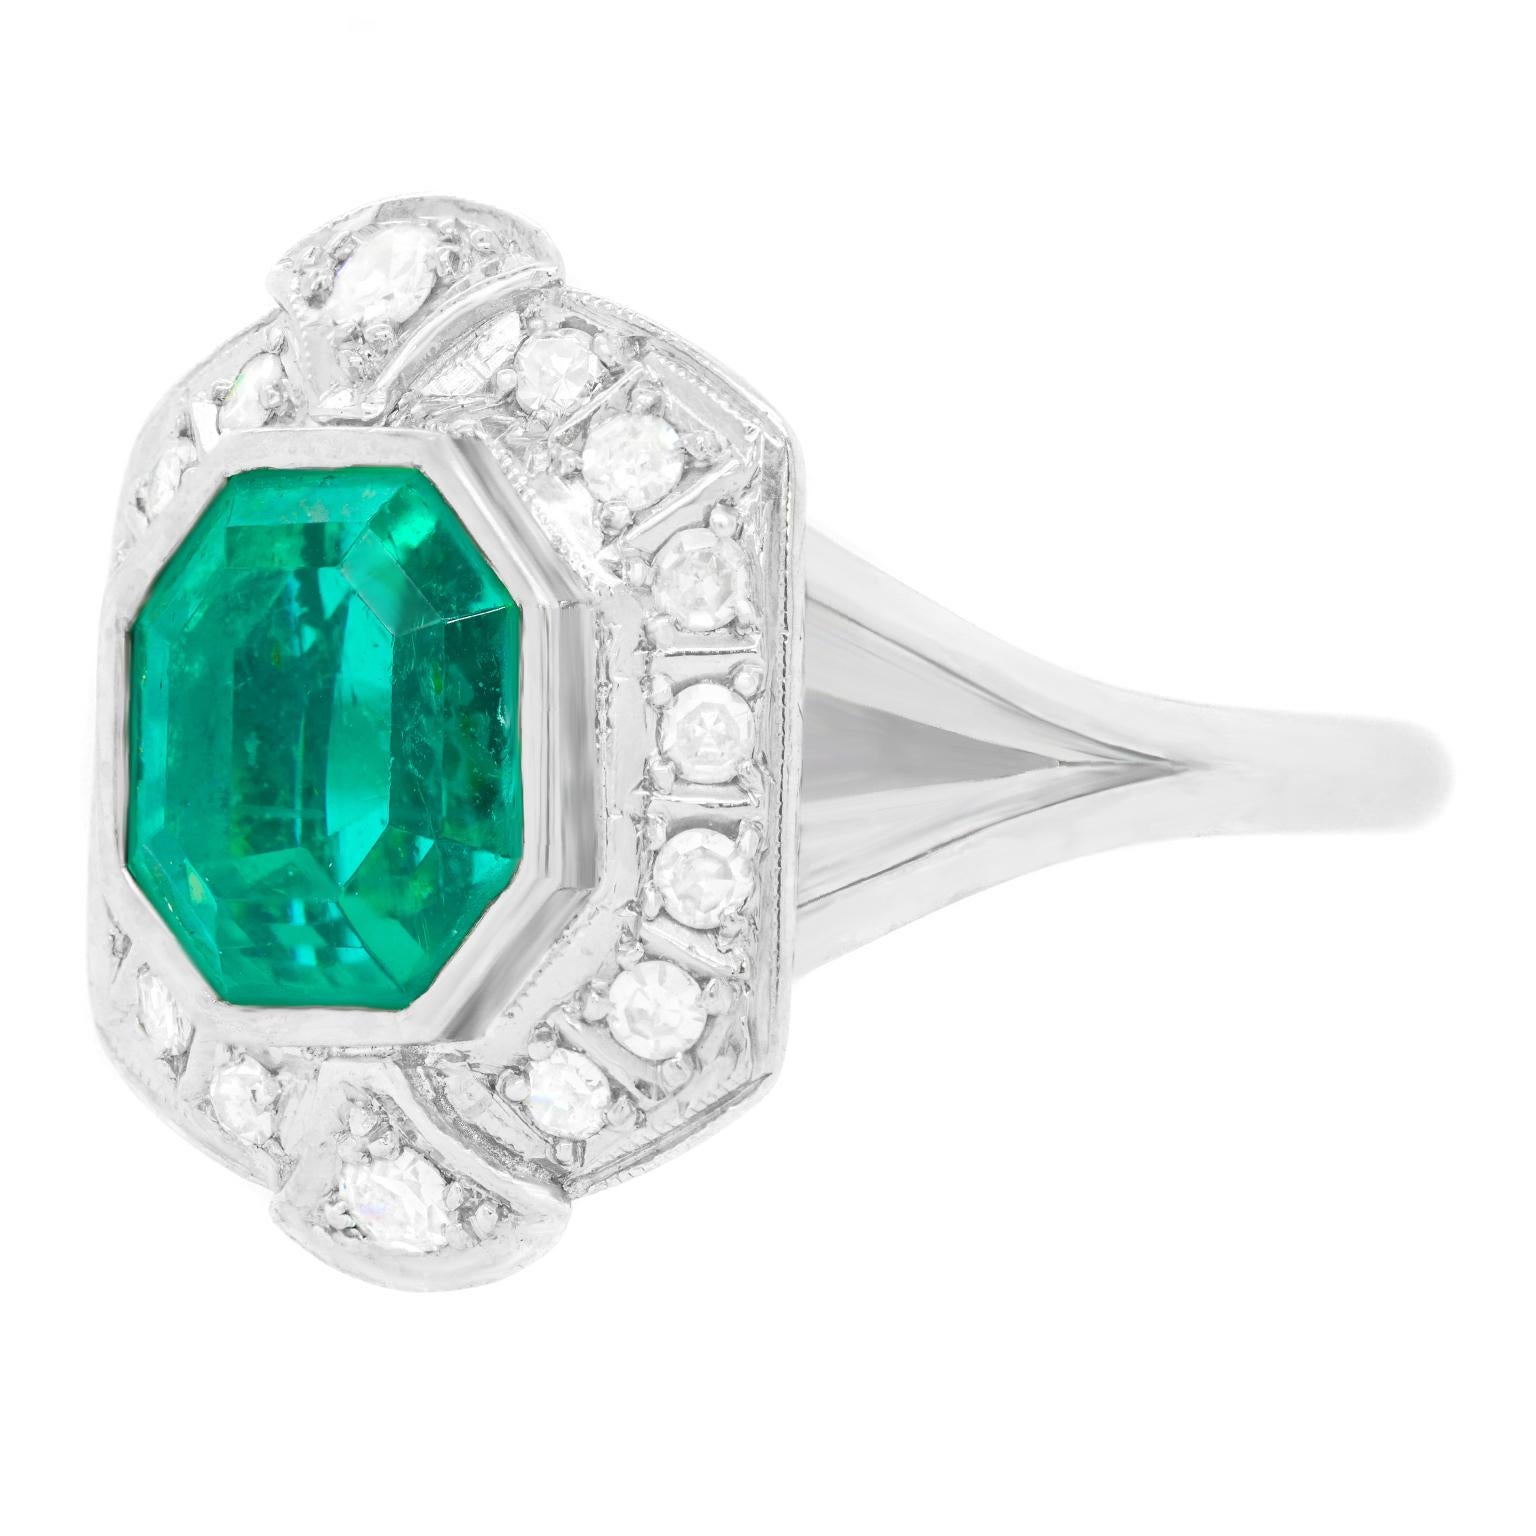 Octagon Cut 4.50 Carat Colombian Emerald and Diamond Art Deco Ring, GIA